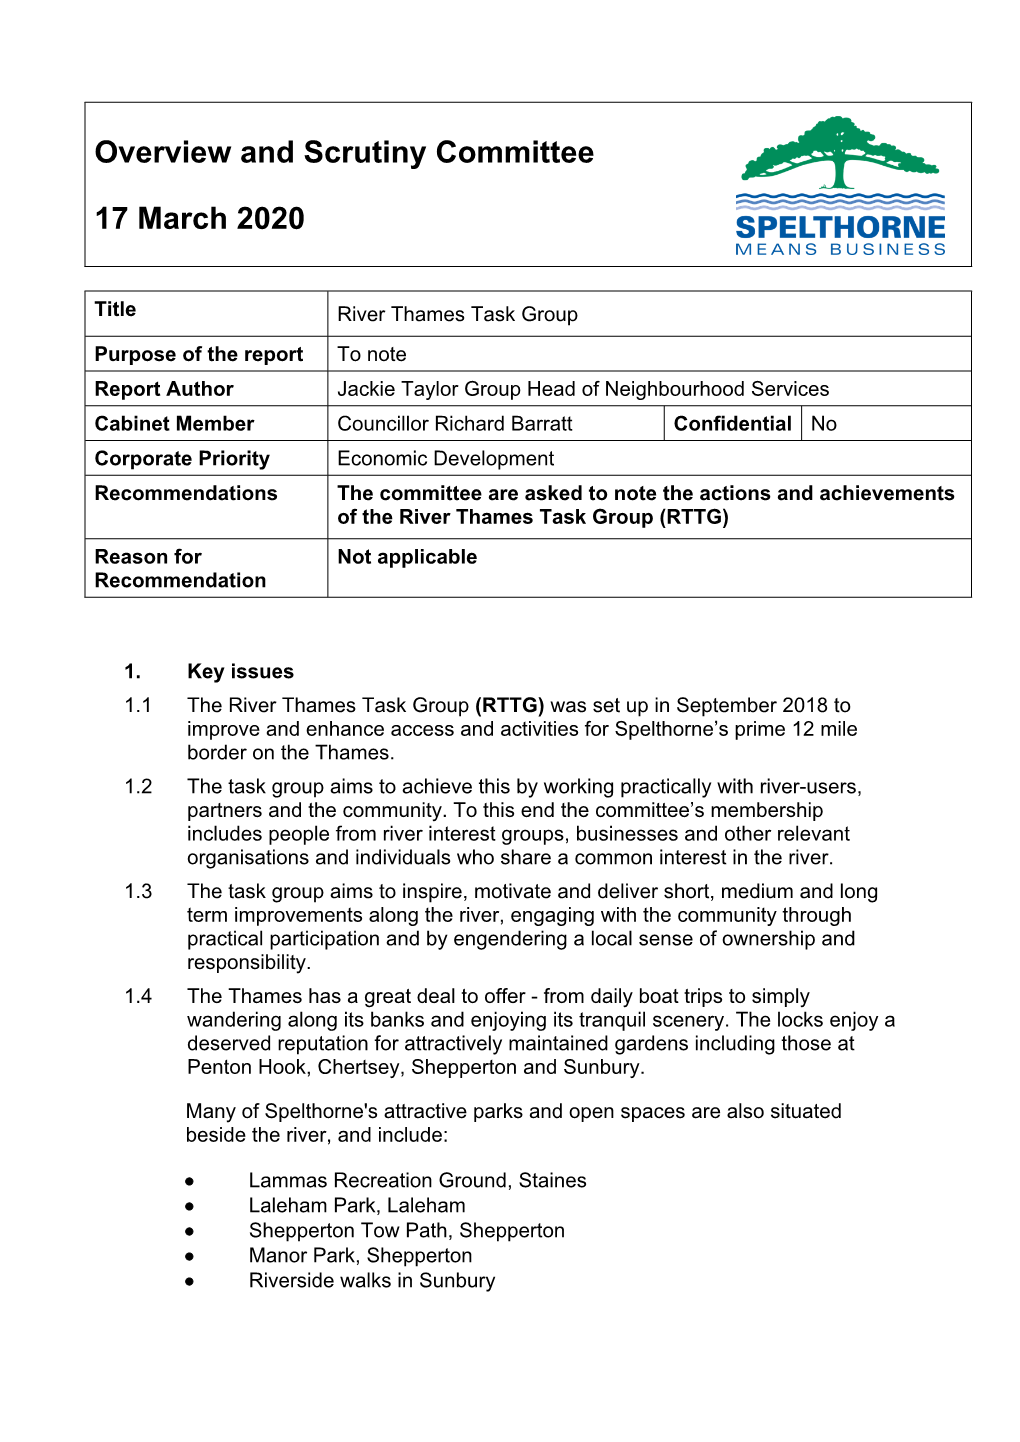 Overview and Scrutiny Committee 17 March 2020